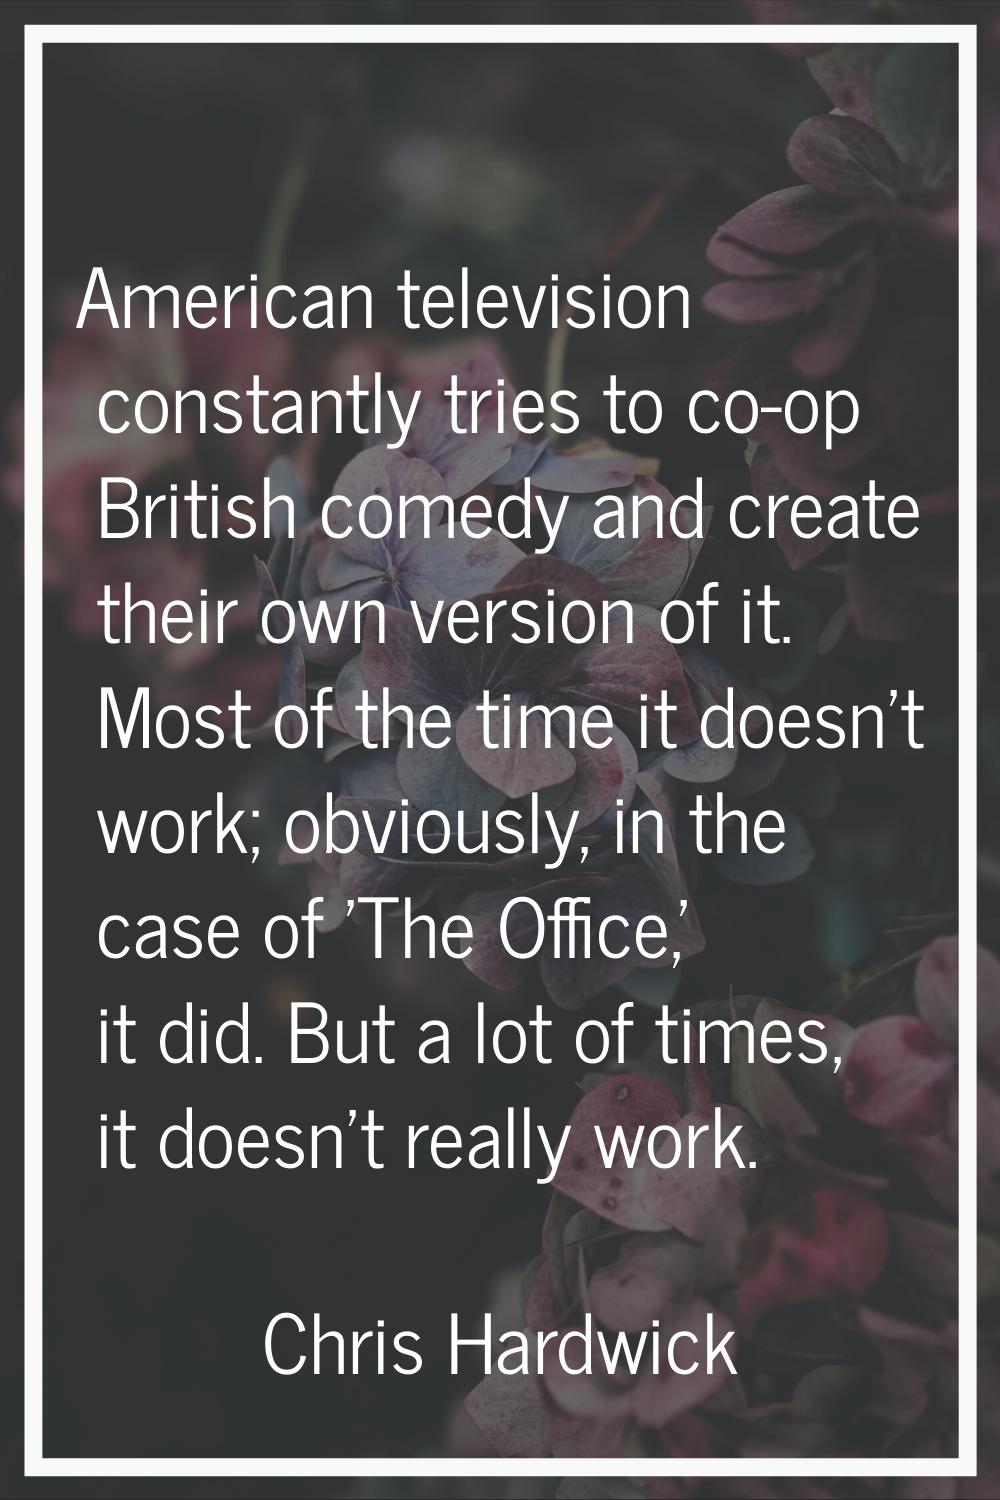 American television constantly tries to co-op British comedy and create their own version of it. Mo